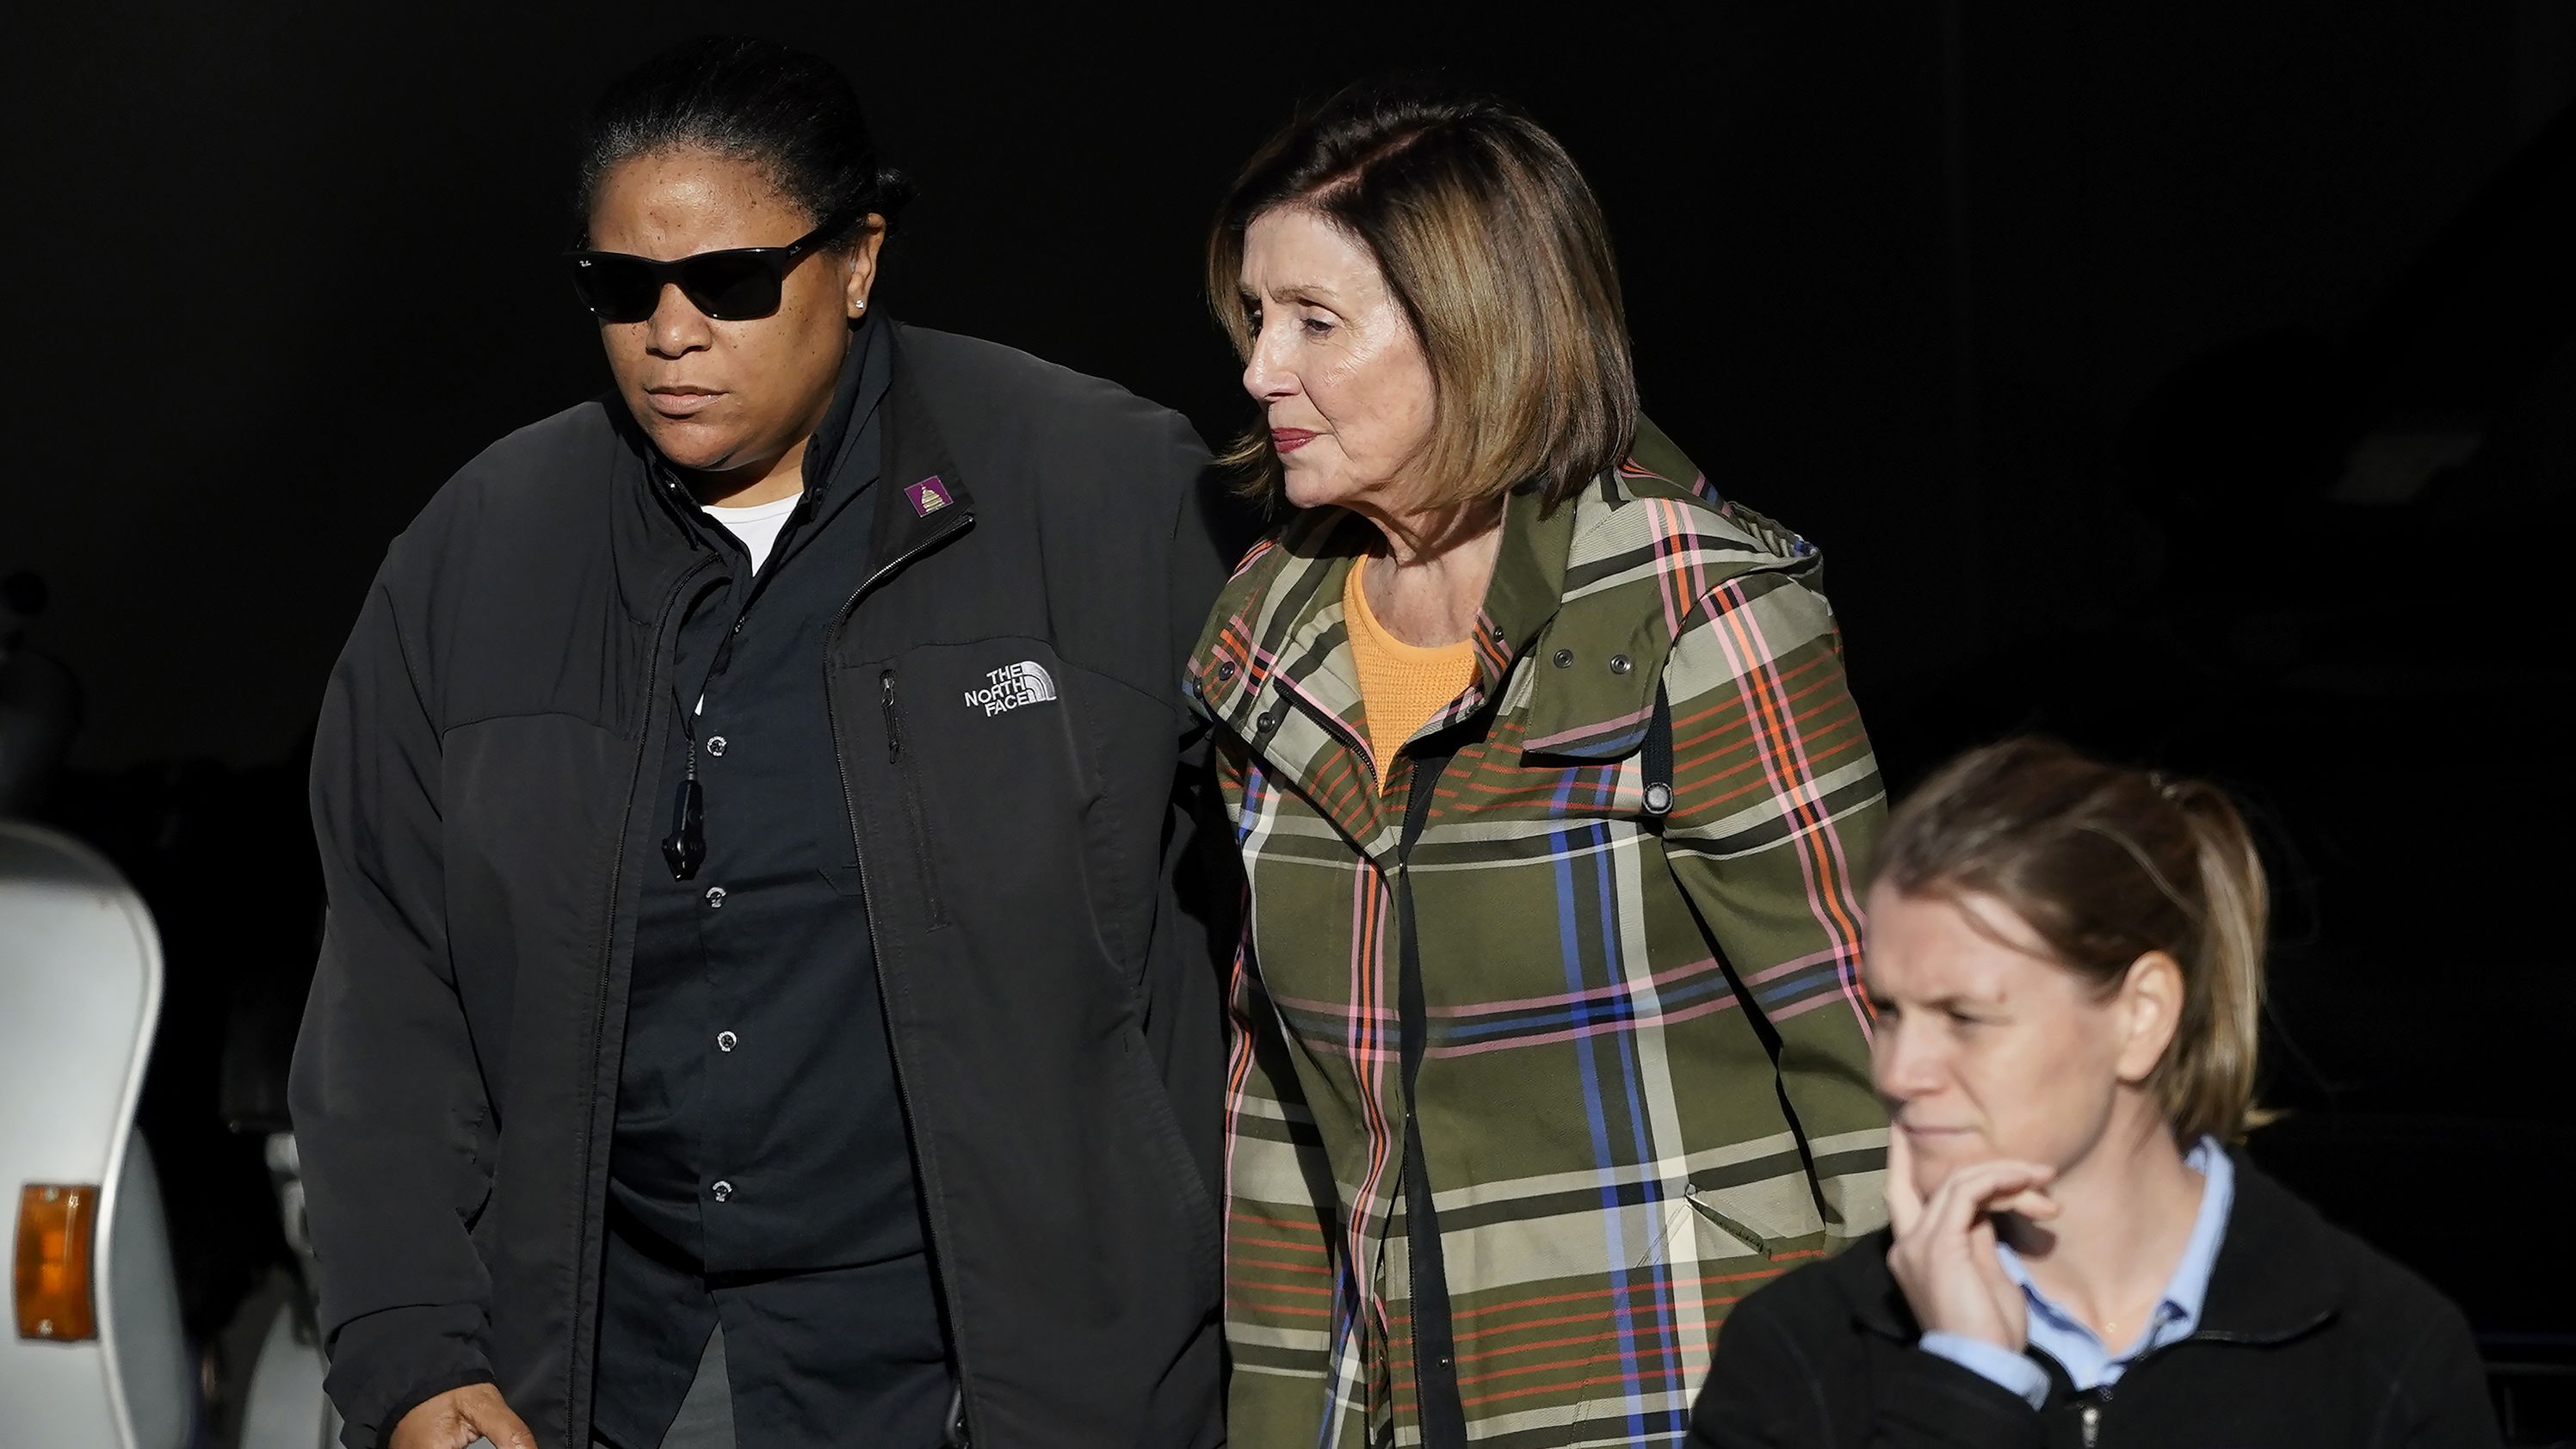 House Speaker Nancy Pelosi is escorted to a vehicle outside of her home in San Francisco on Wednesday, November 2. Pelosi's husband, Paul, was <a href="https://www.cnn.com/politics/live-news/nancy-pelosi-husband-paul-attack/index.html" target="_blank">attacked with a hammer</a> at the couple's home on October 28.